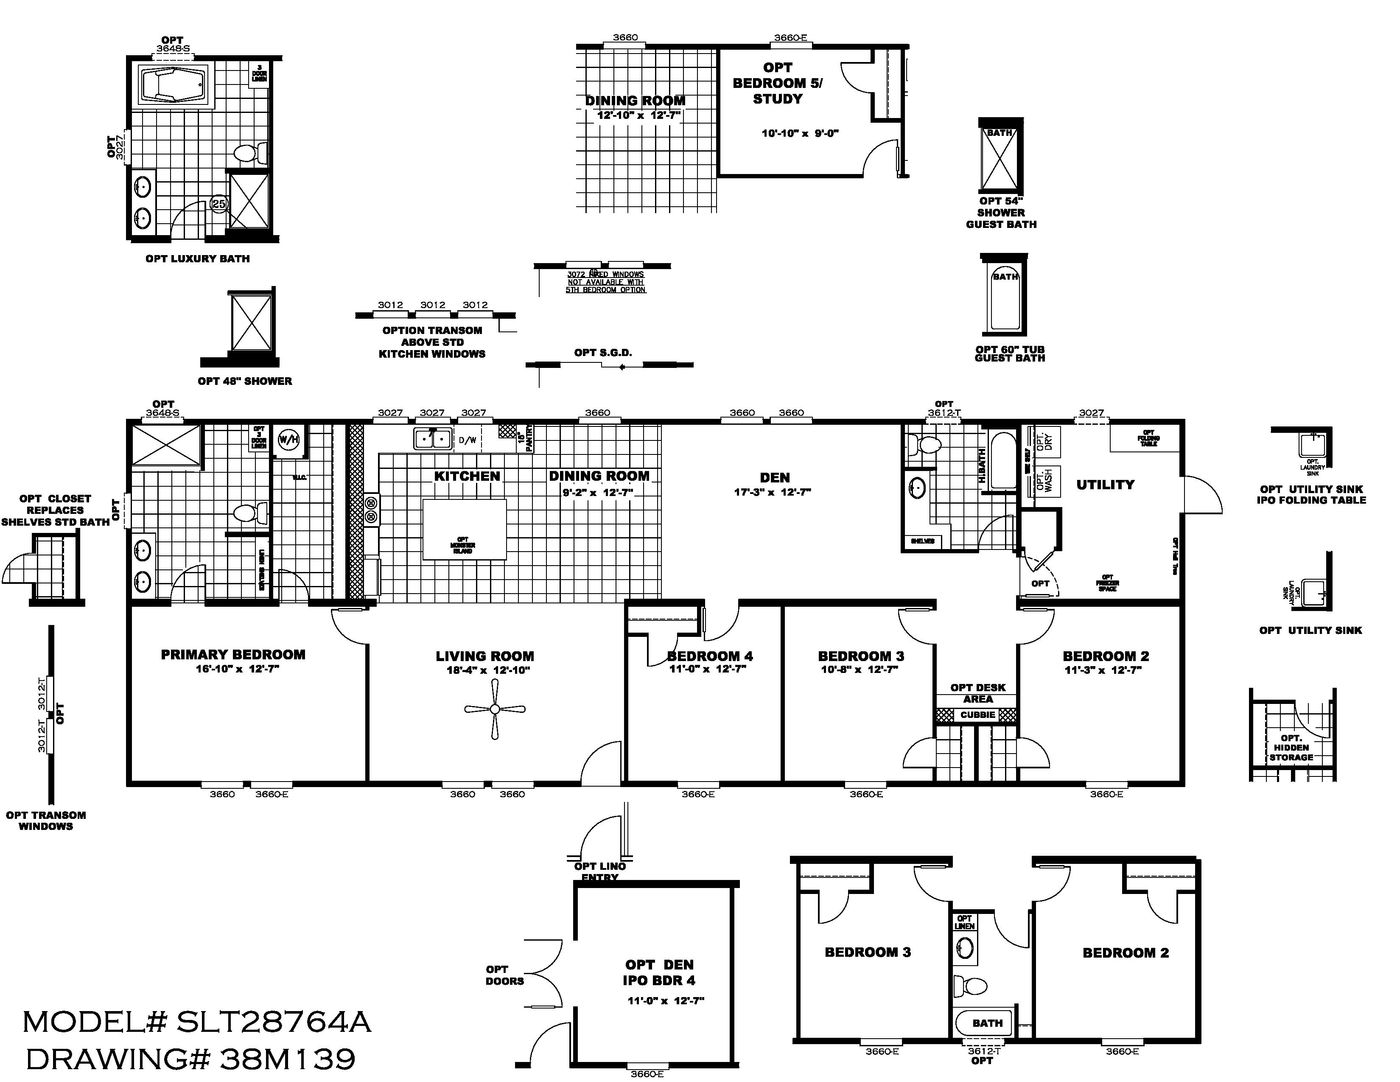 The Absolute Value Floor Plan